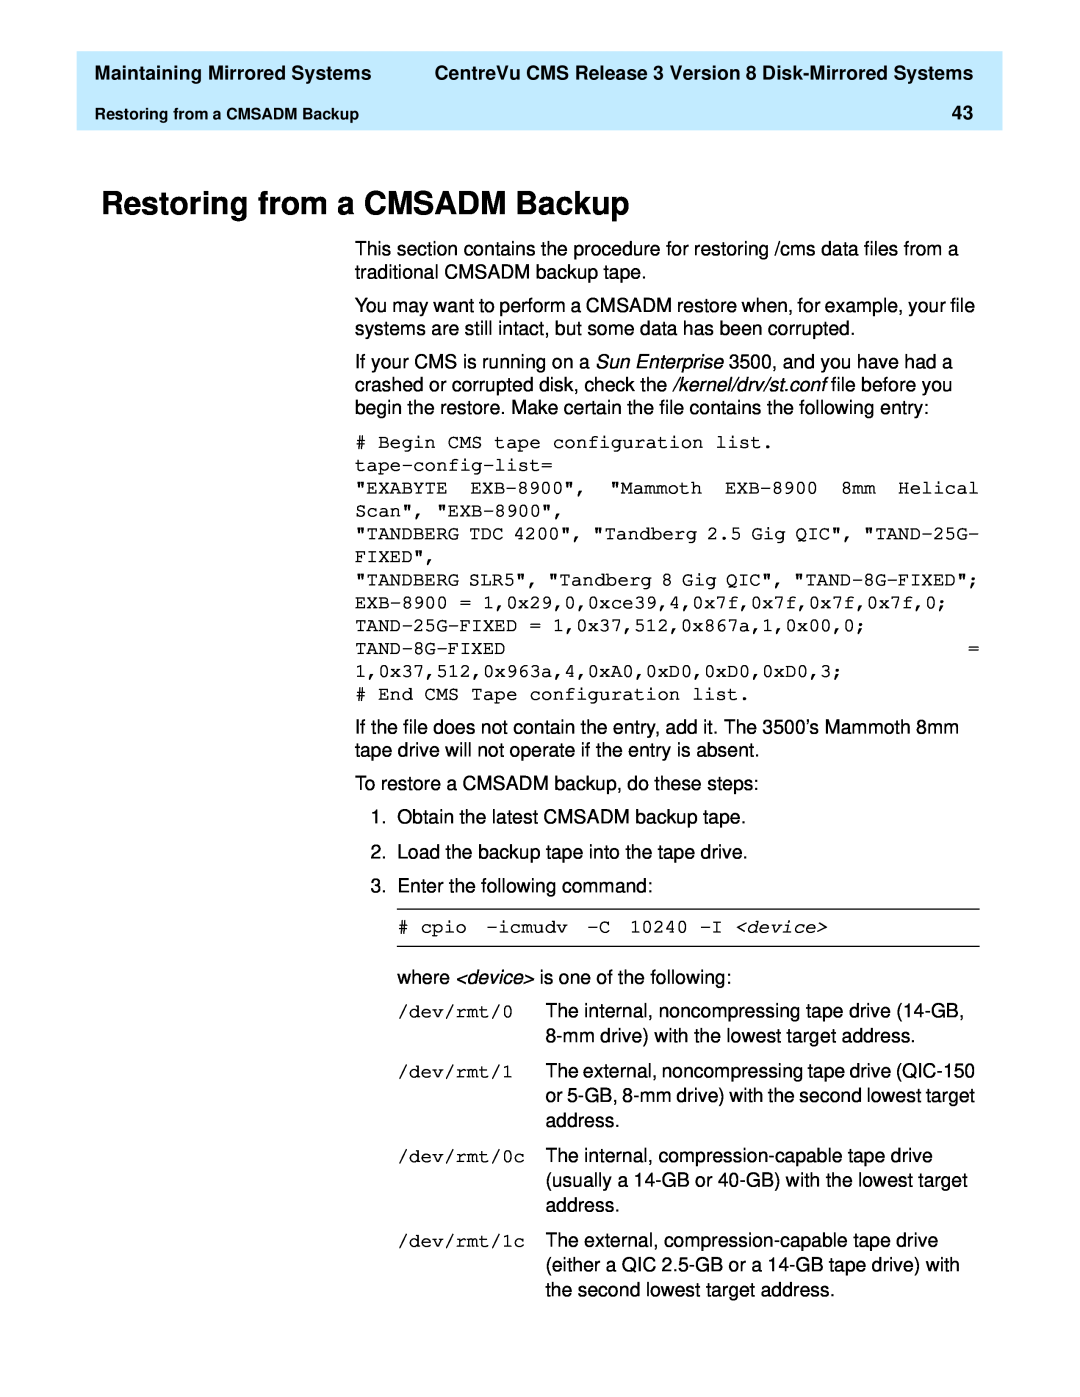 Lucent Technologies 585-210-940 manual Restoring from a CMSADM Backup, Maintaining Mirrored Systems 